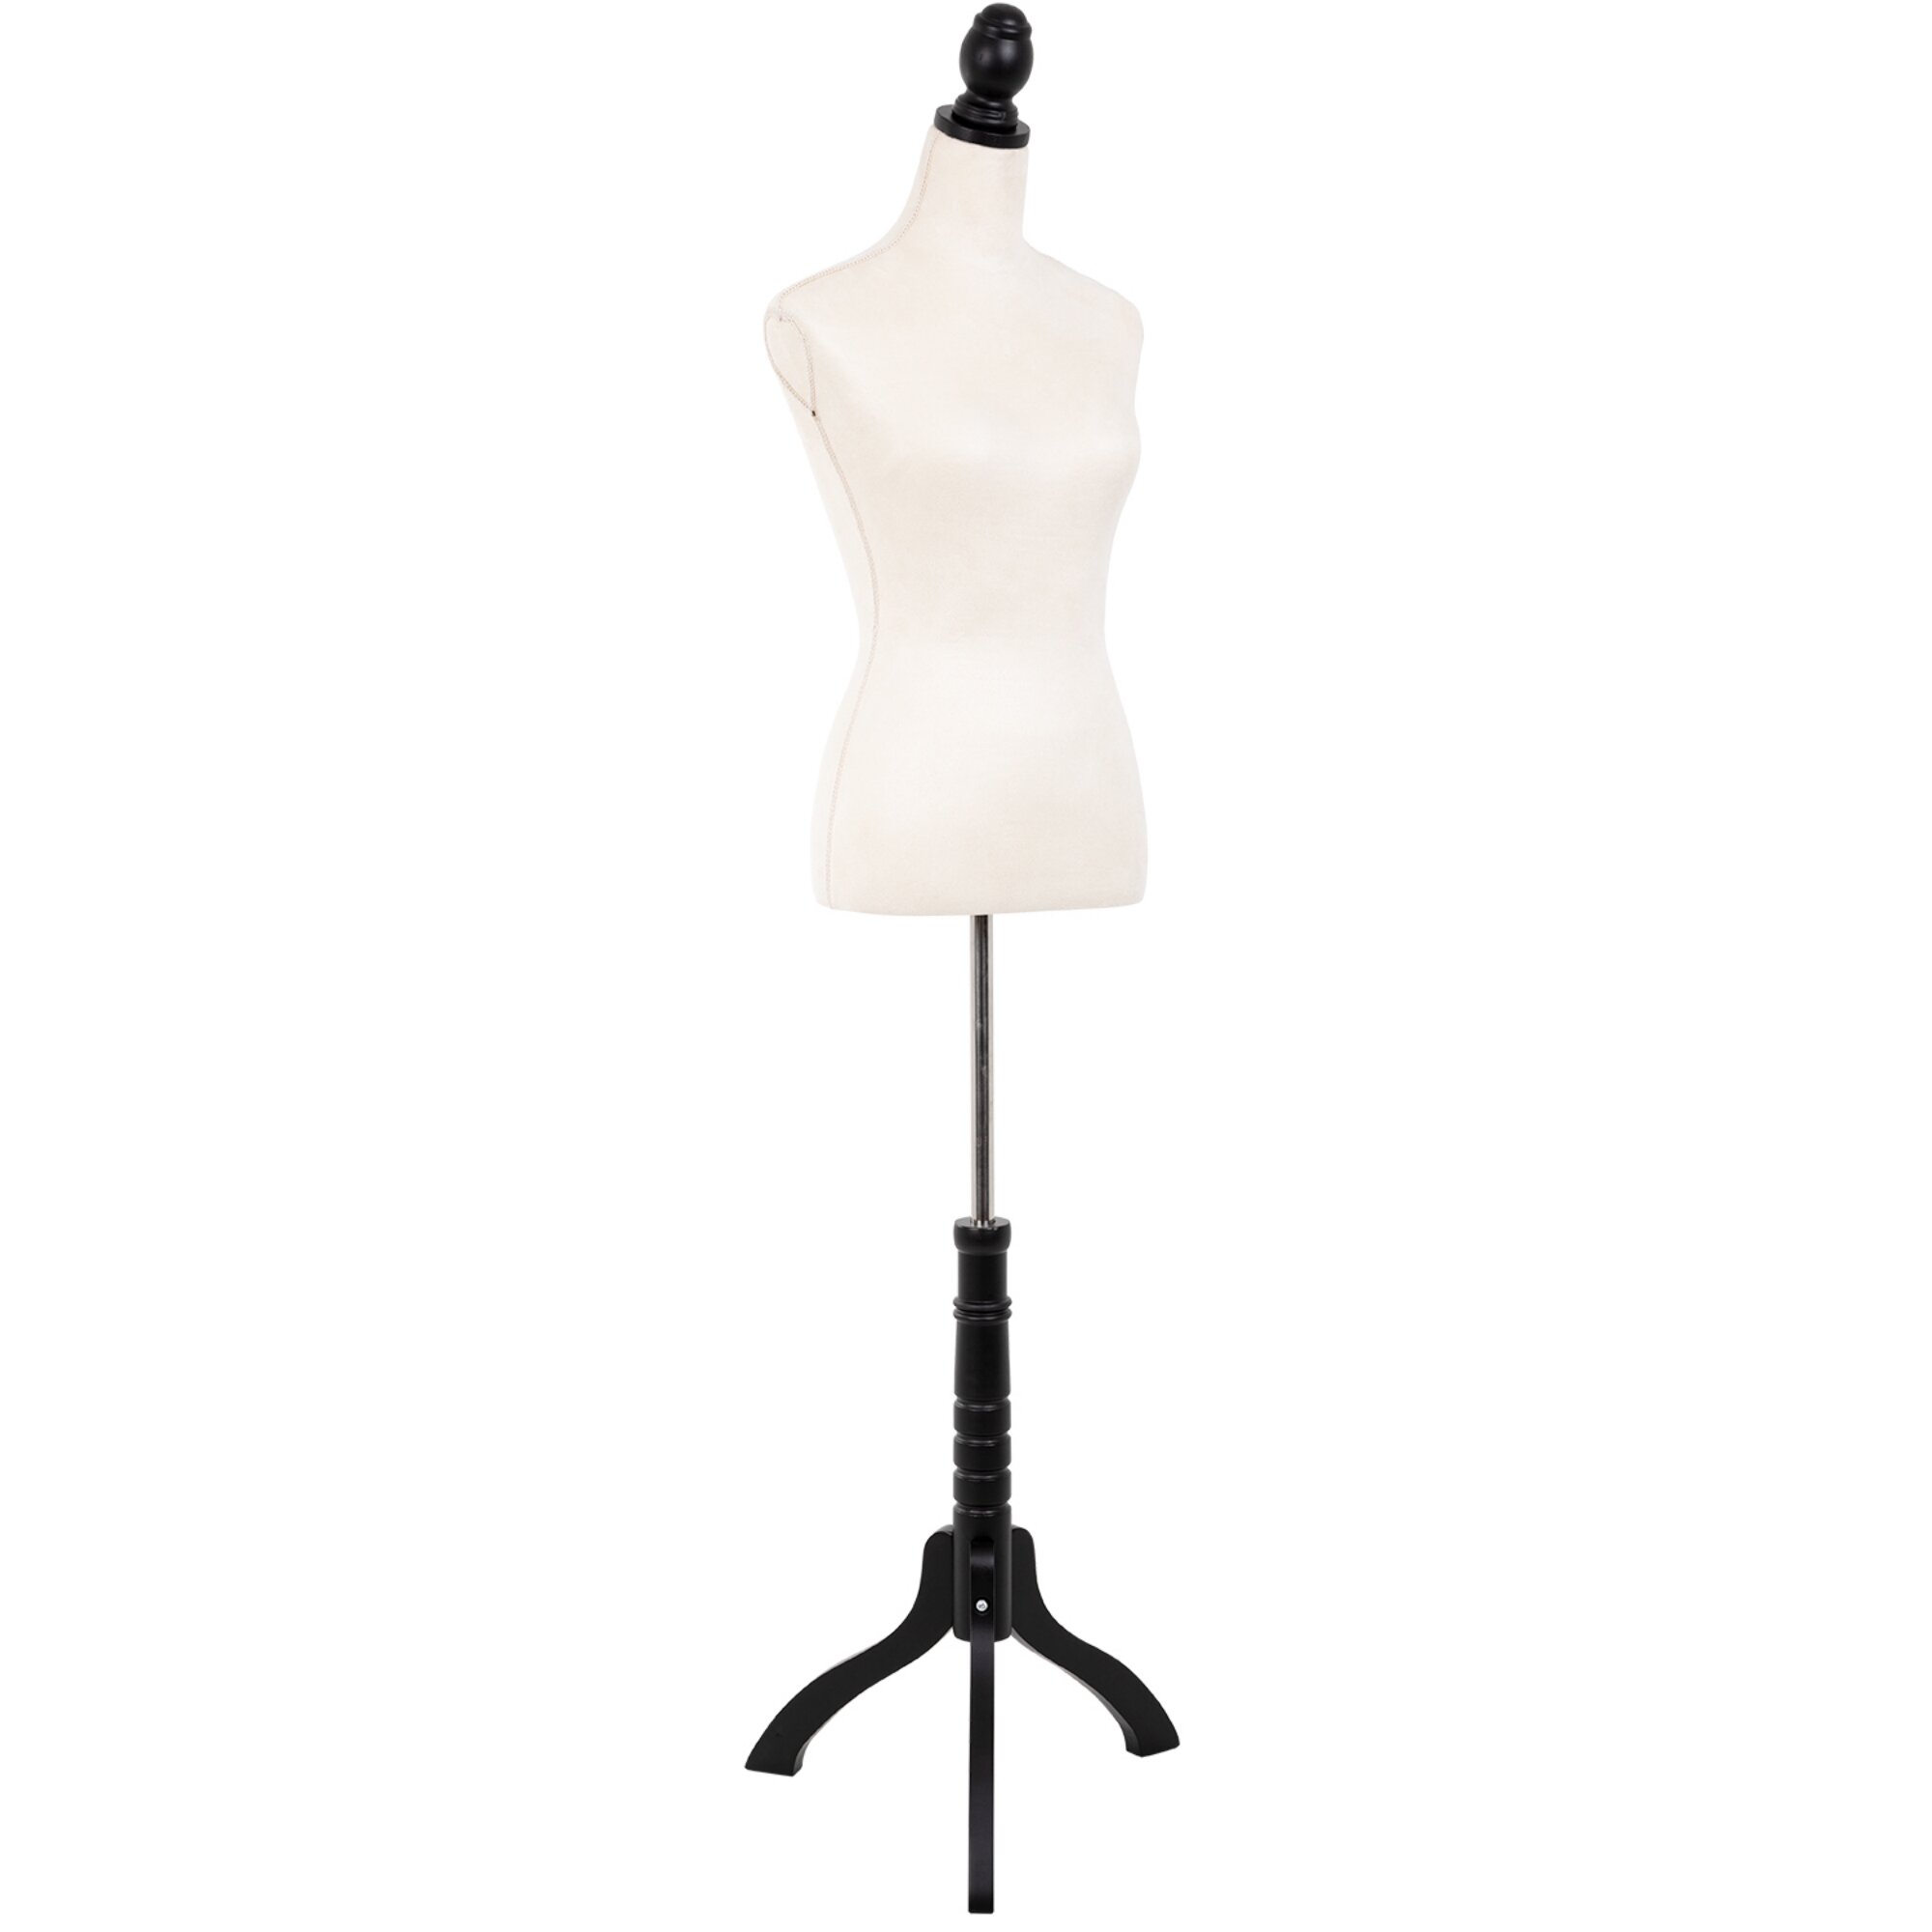 FDW Female Full Body Realistic Mannequin with Base for sale online 